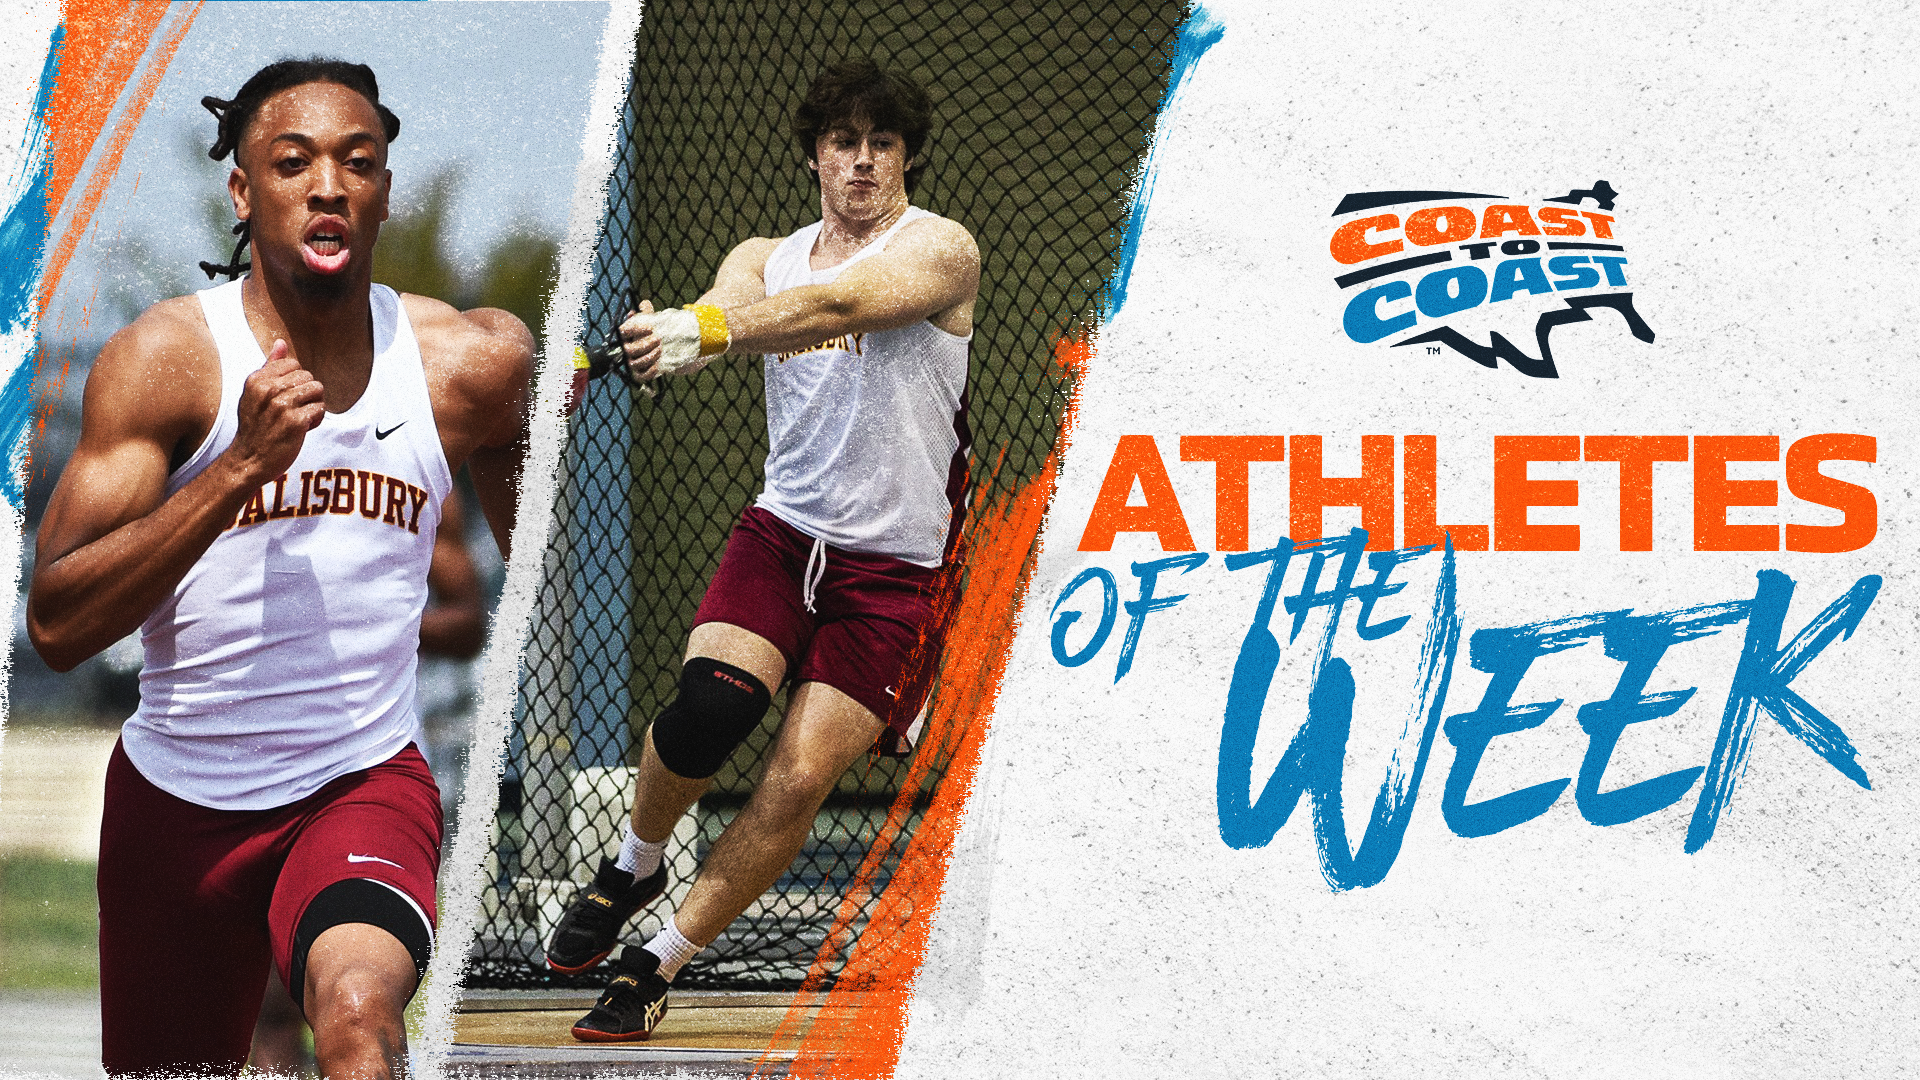 SU’s Smith and Kelsch Claim C2C Men's Track and Field Athletes of the Week